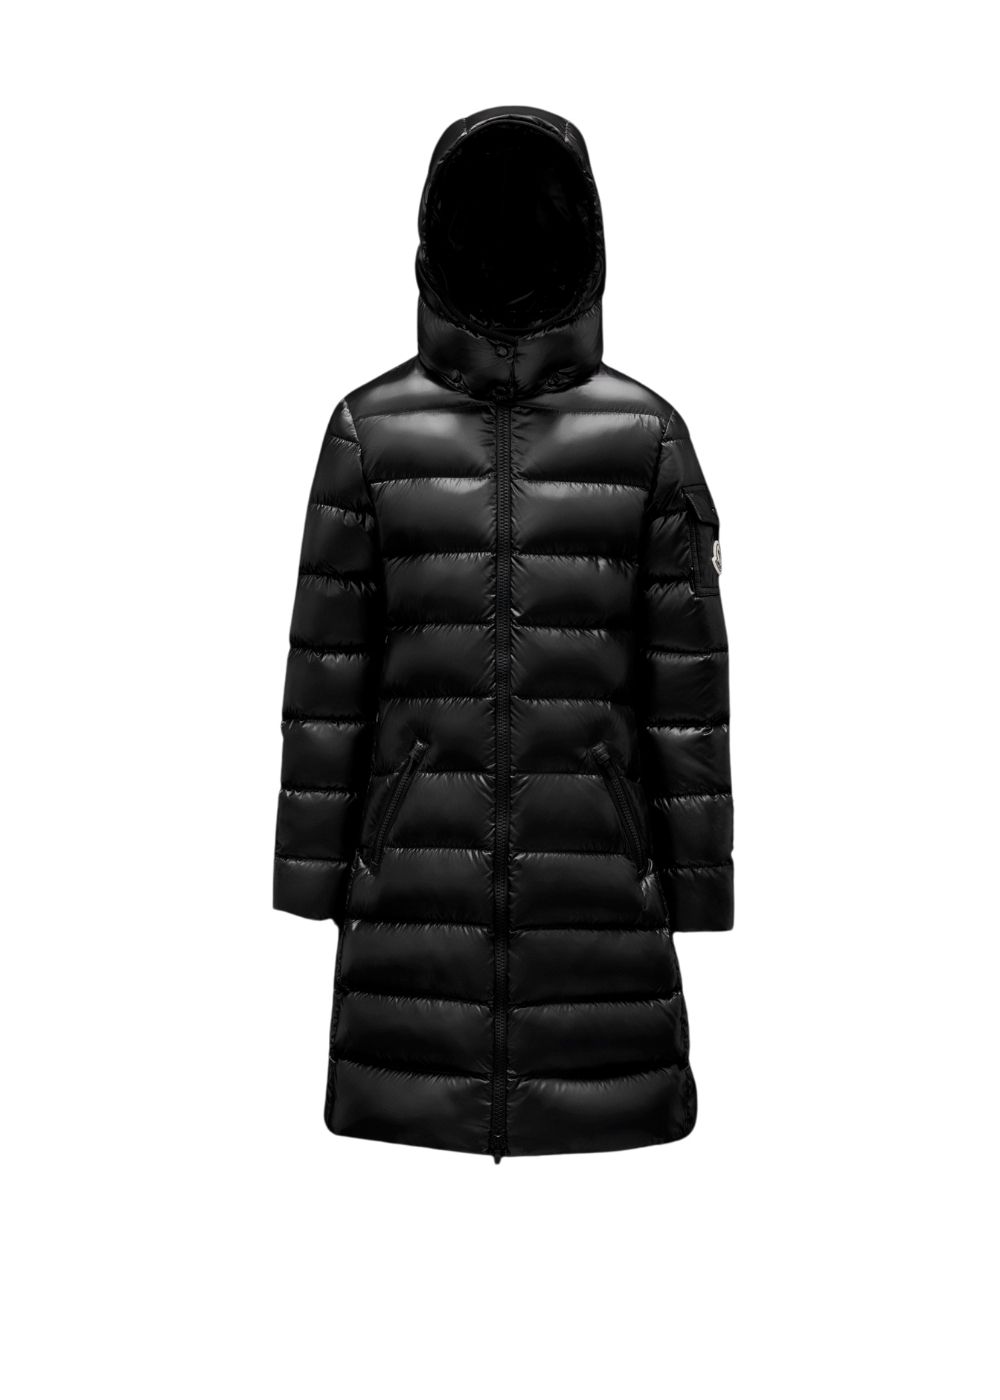 Featured image for “Moncler Moka”